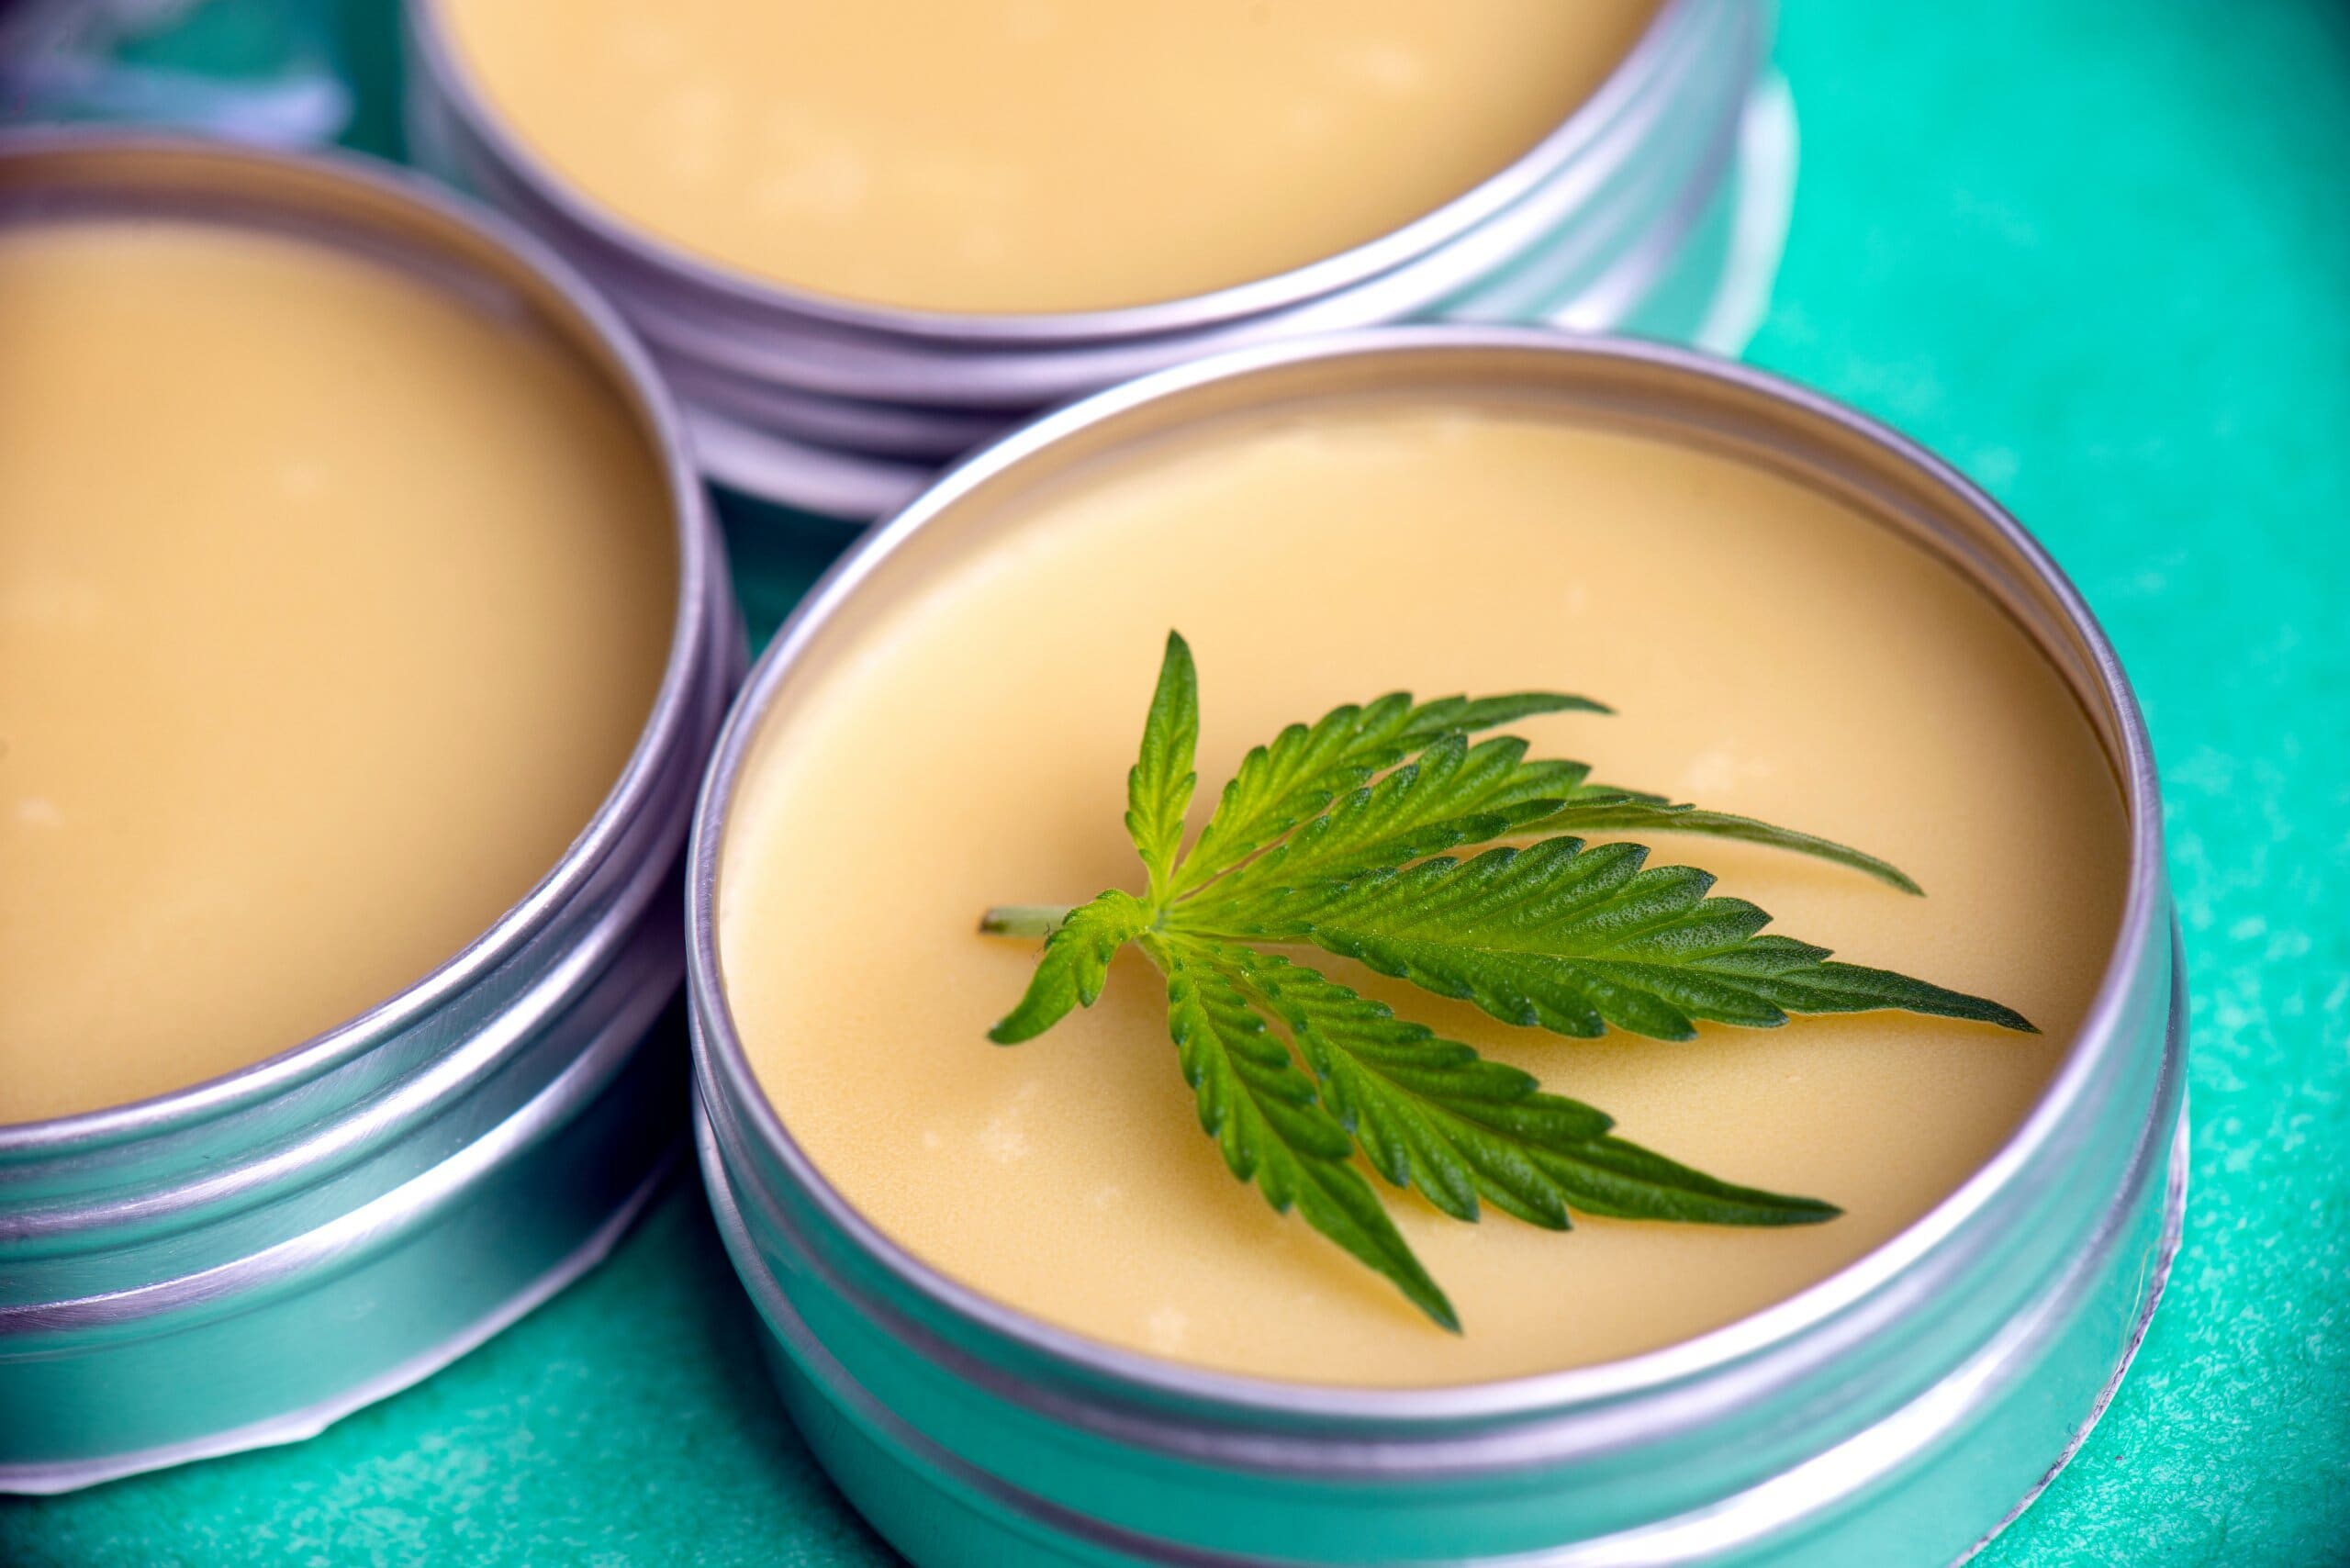 Silver tins of yellow balm with a hemp leaf on top.